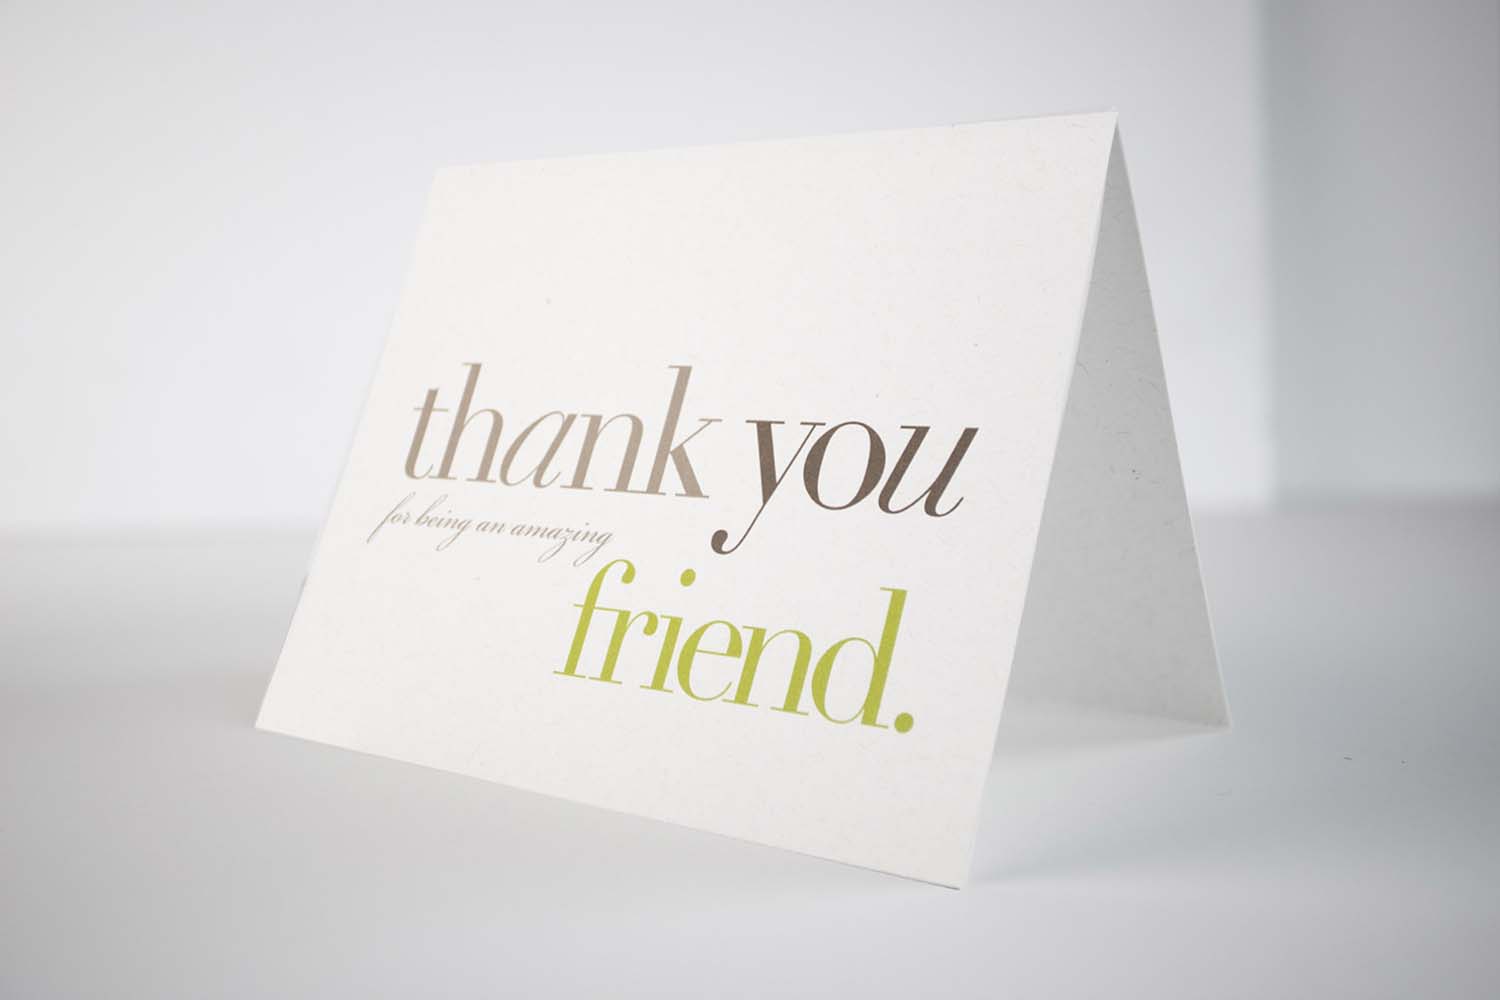 Thank You (for being an amazing friend) Card